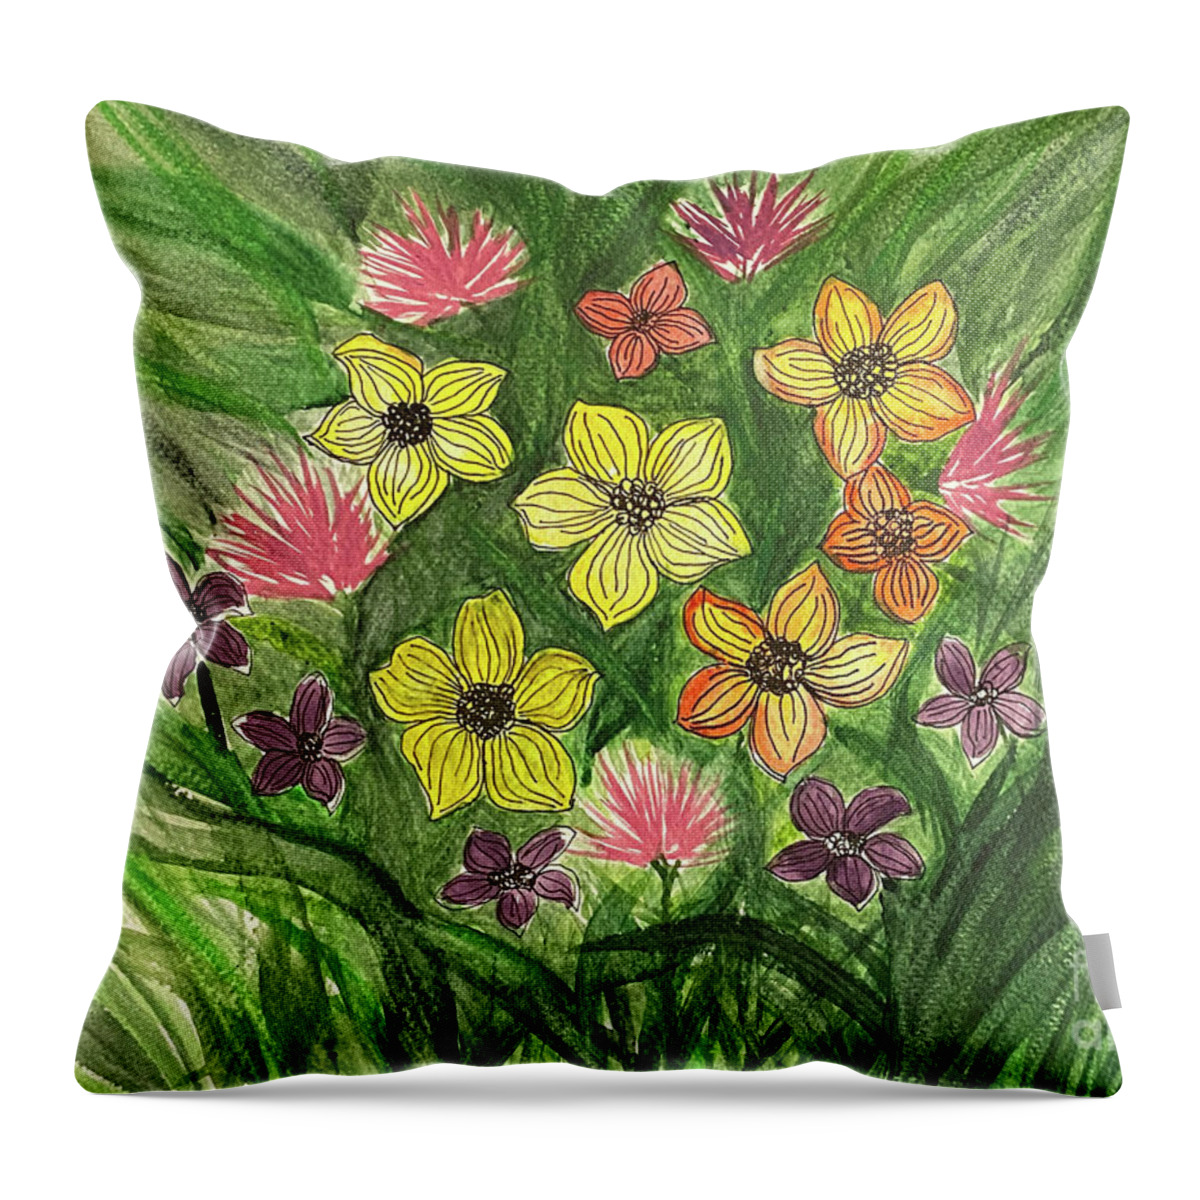 Flowers Throw Pillow featuring the mixed media Flowers by Lisa Neuman